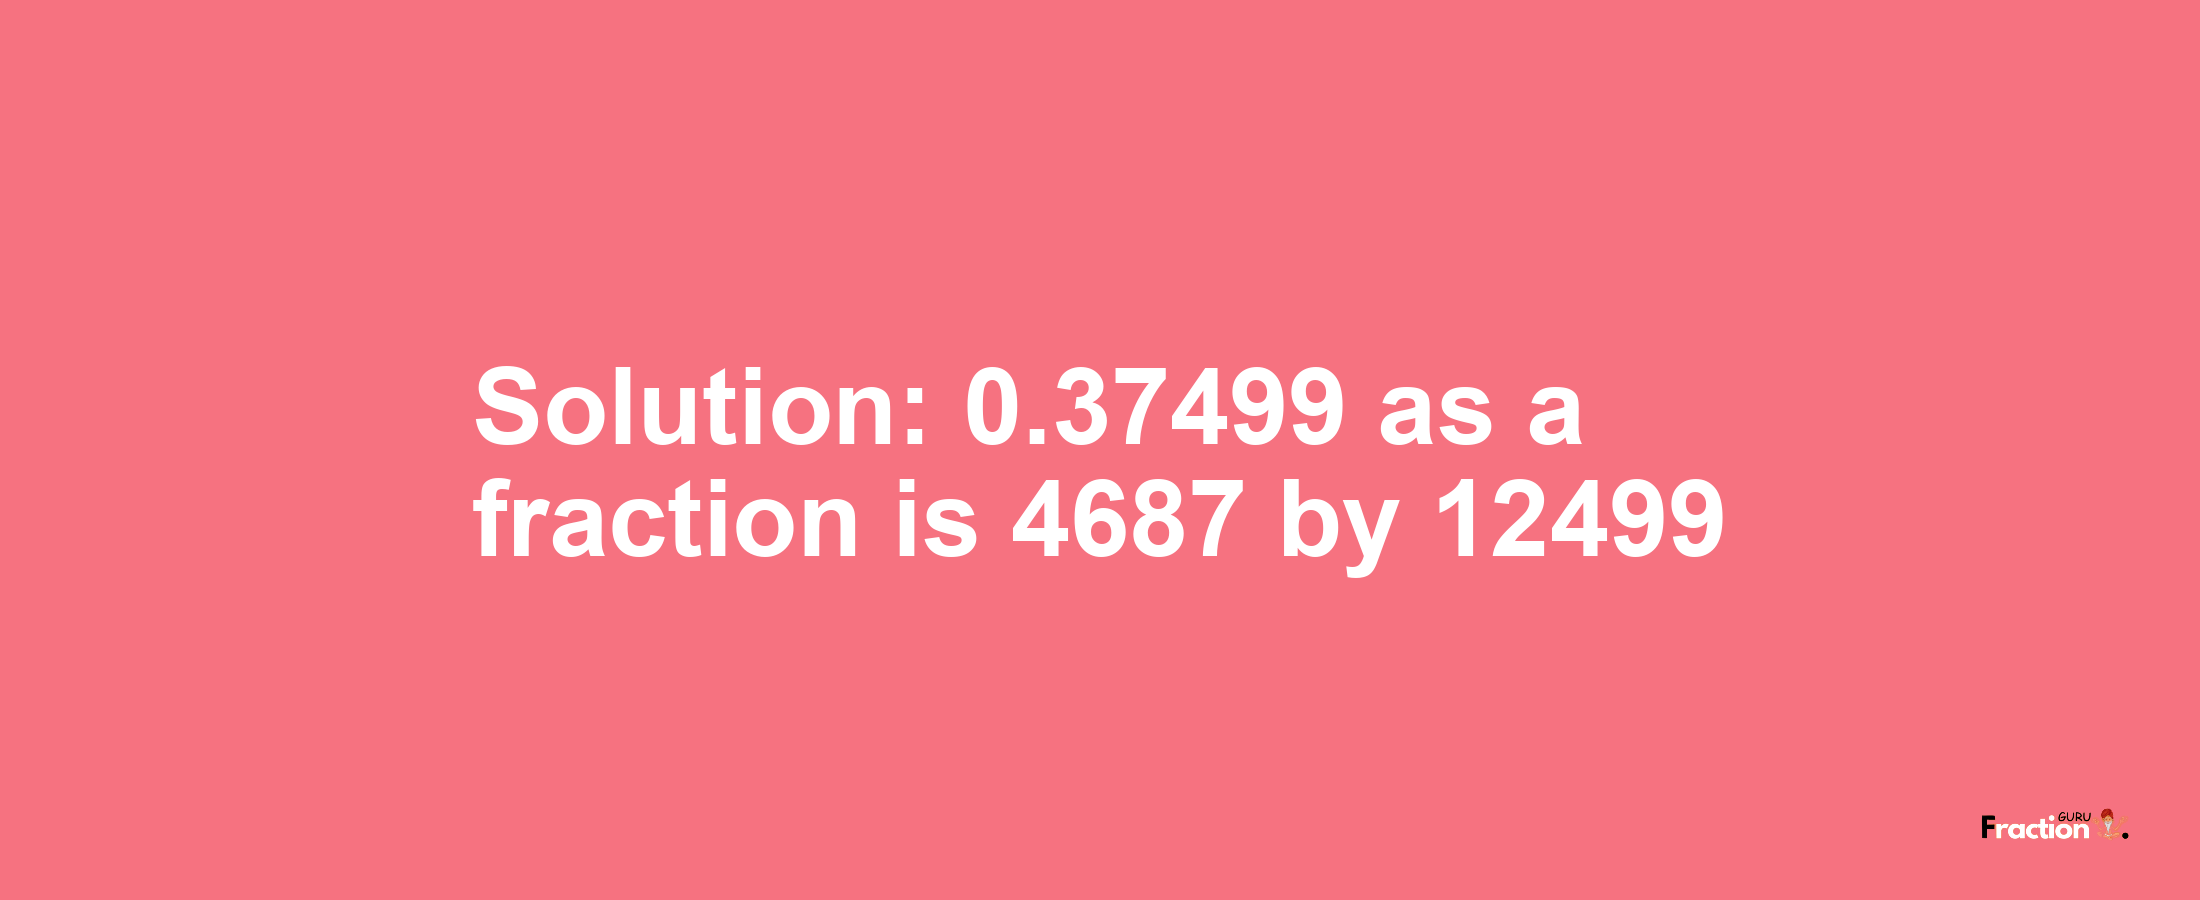 Solution:0.37499 as a fraction is 4687/12499